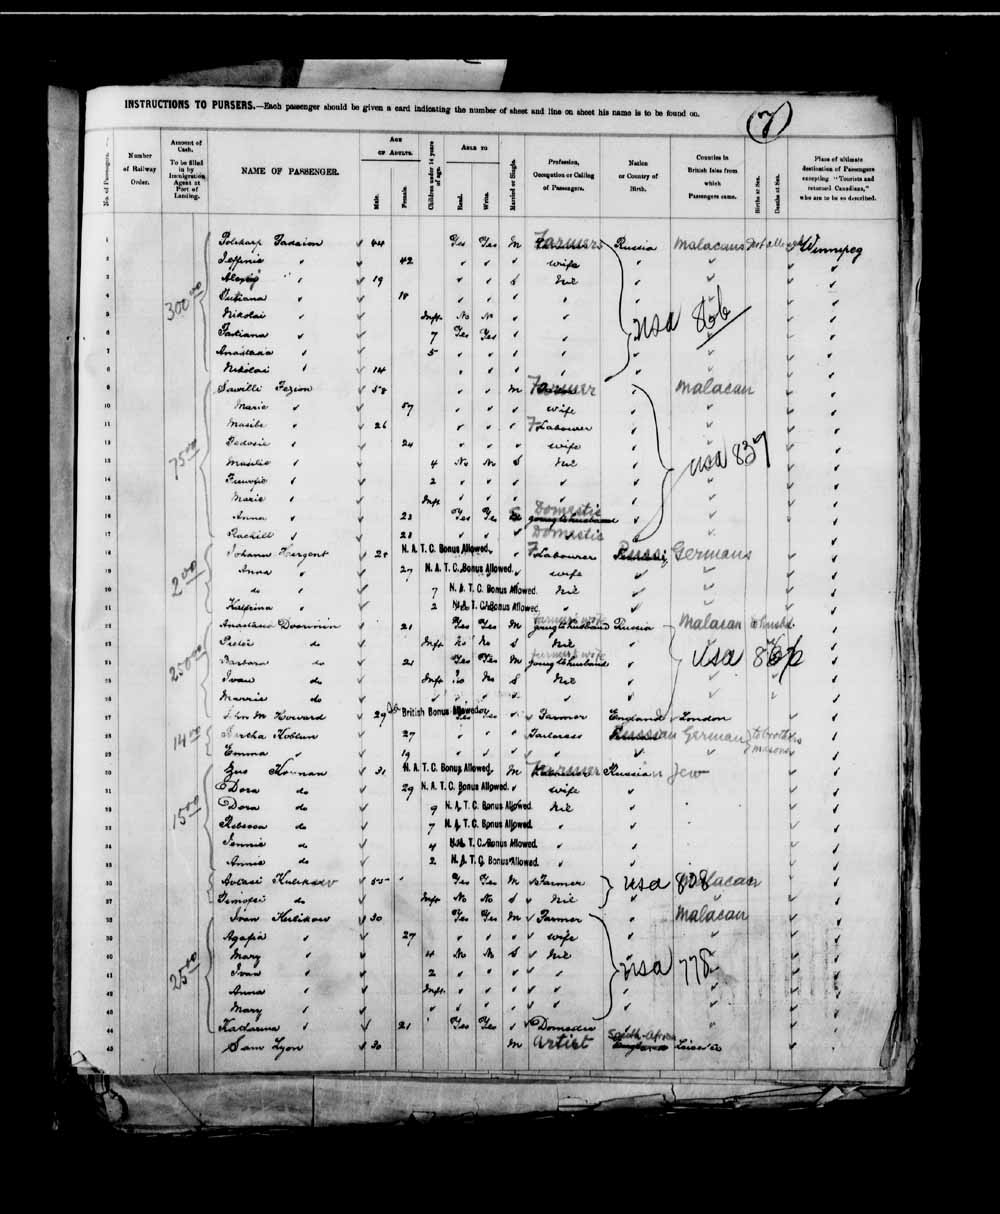 Digitized page of Passenger Lists for Image No.: e003658077